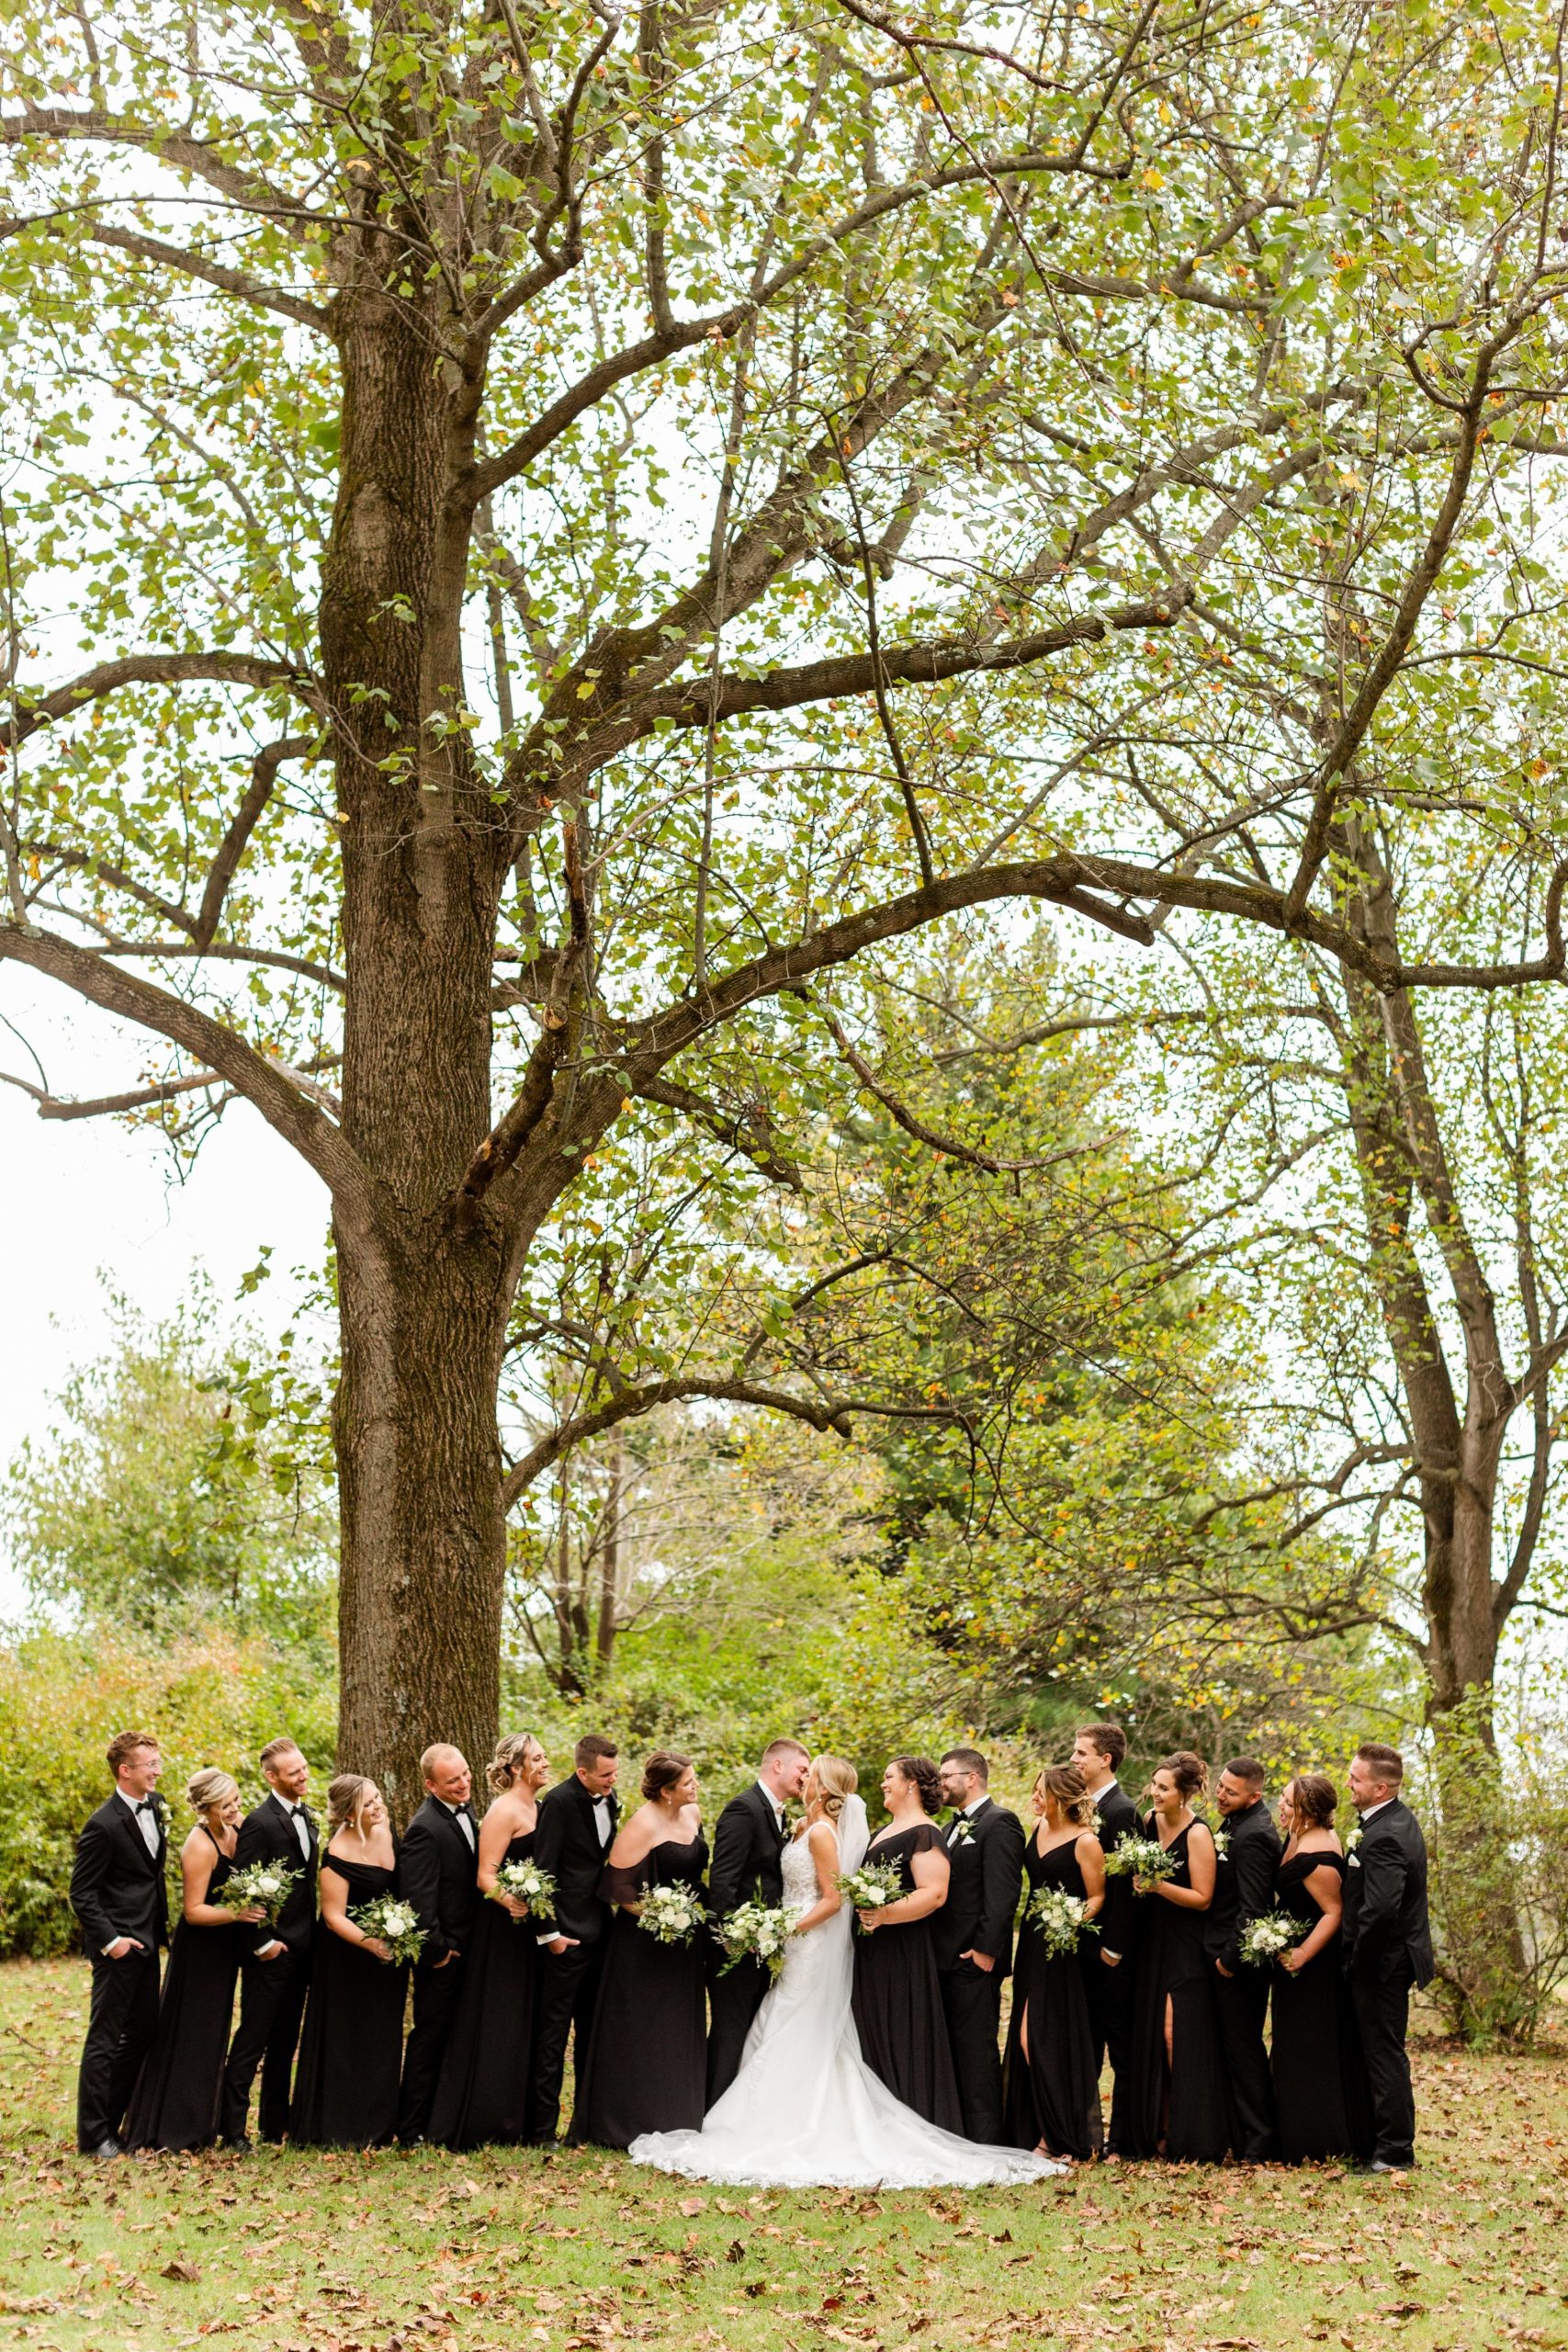 Hannah and Cody's Wedding in Booneville, IN118.jpg